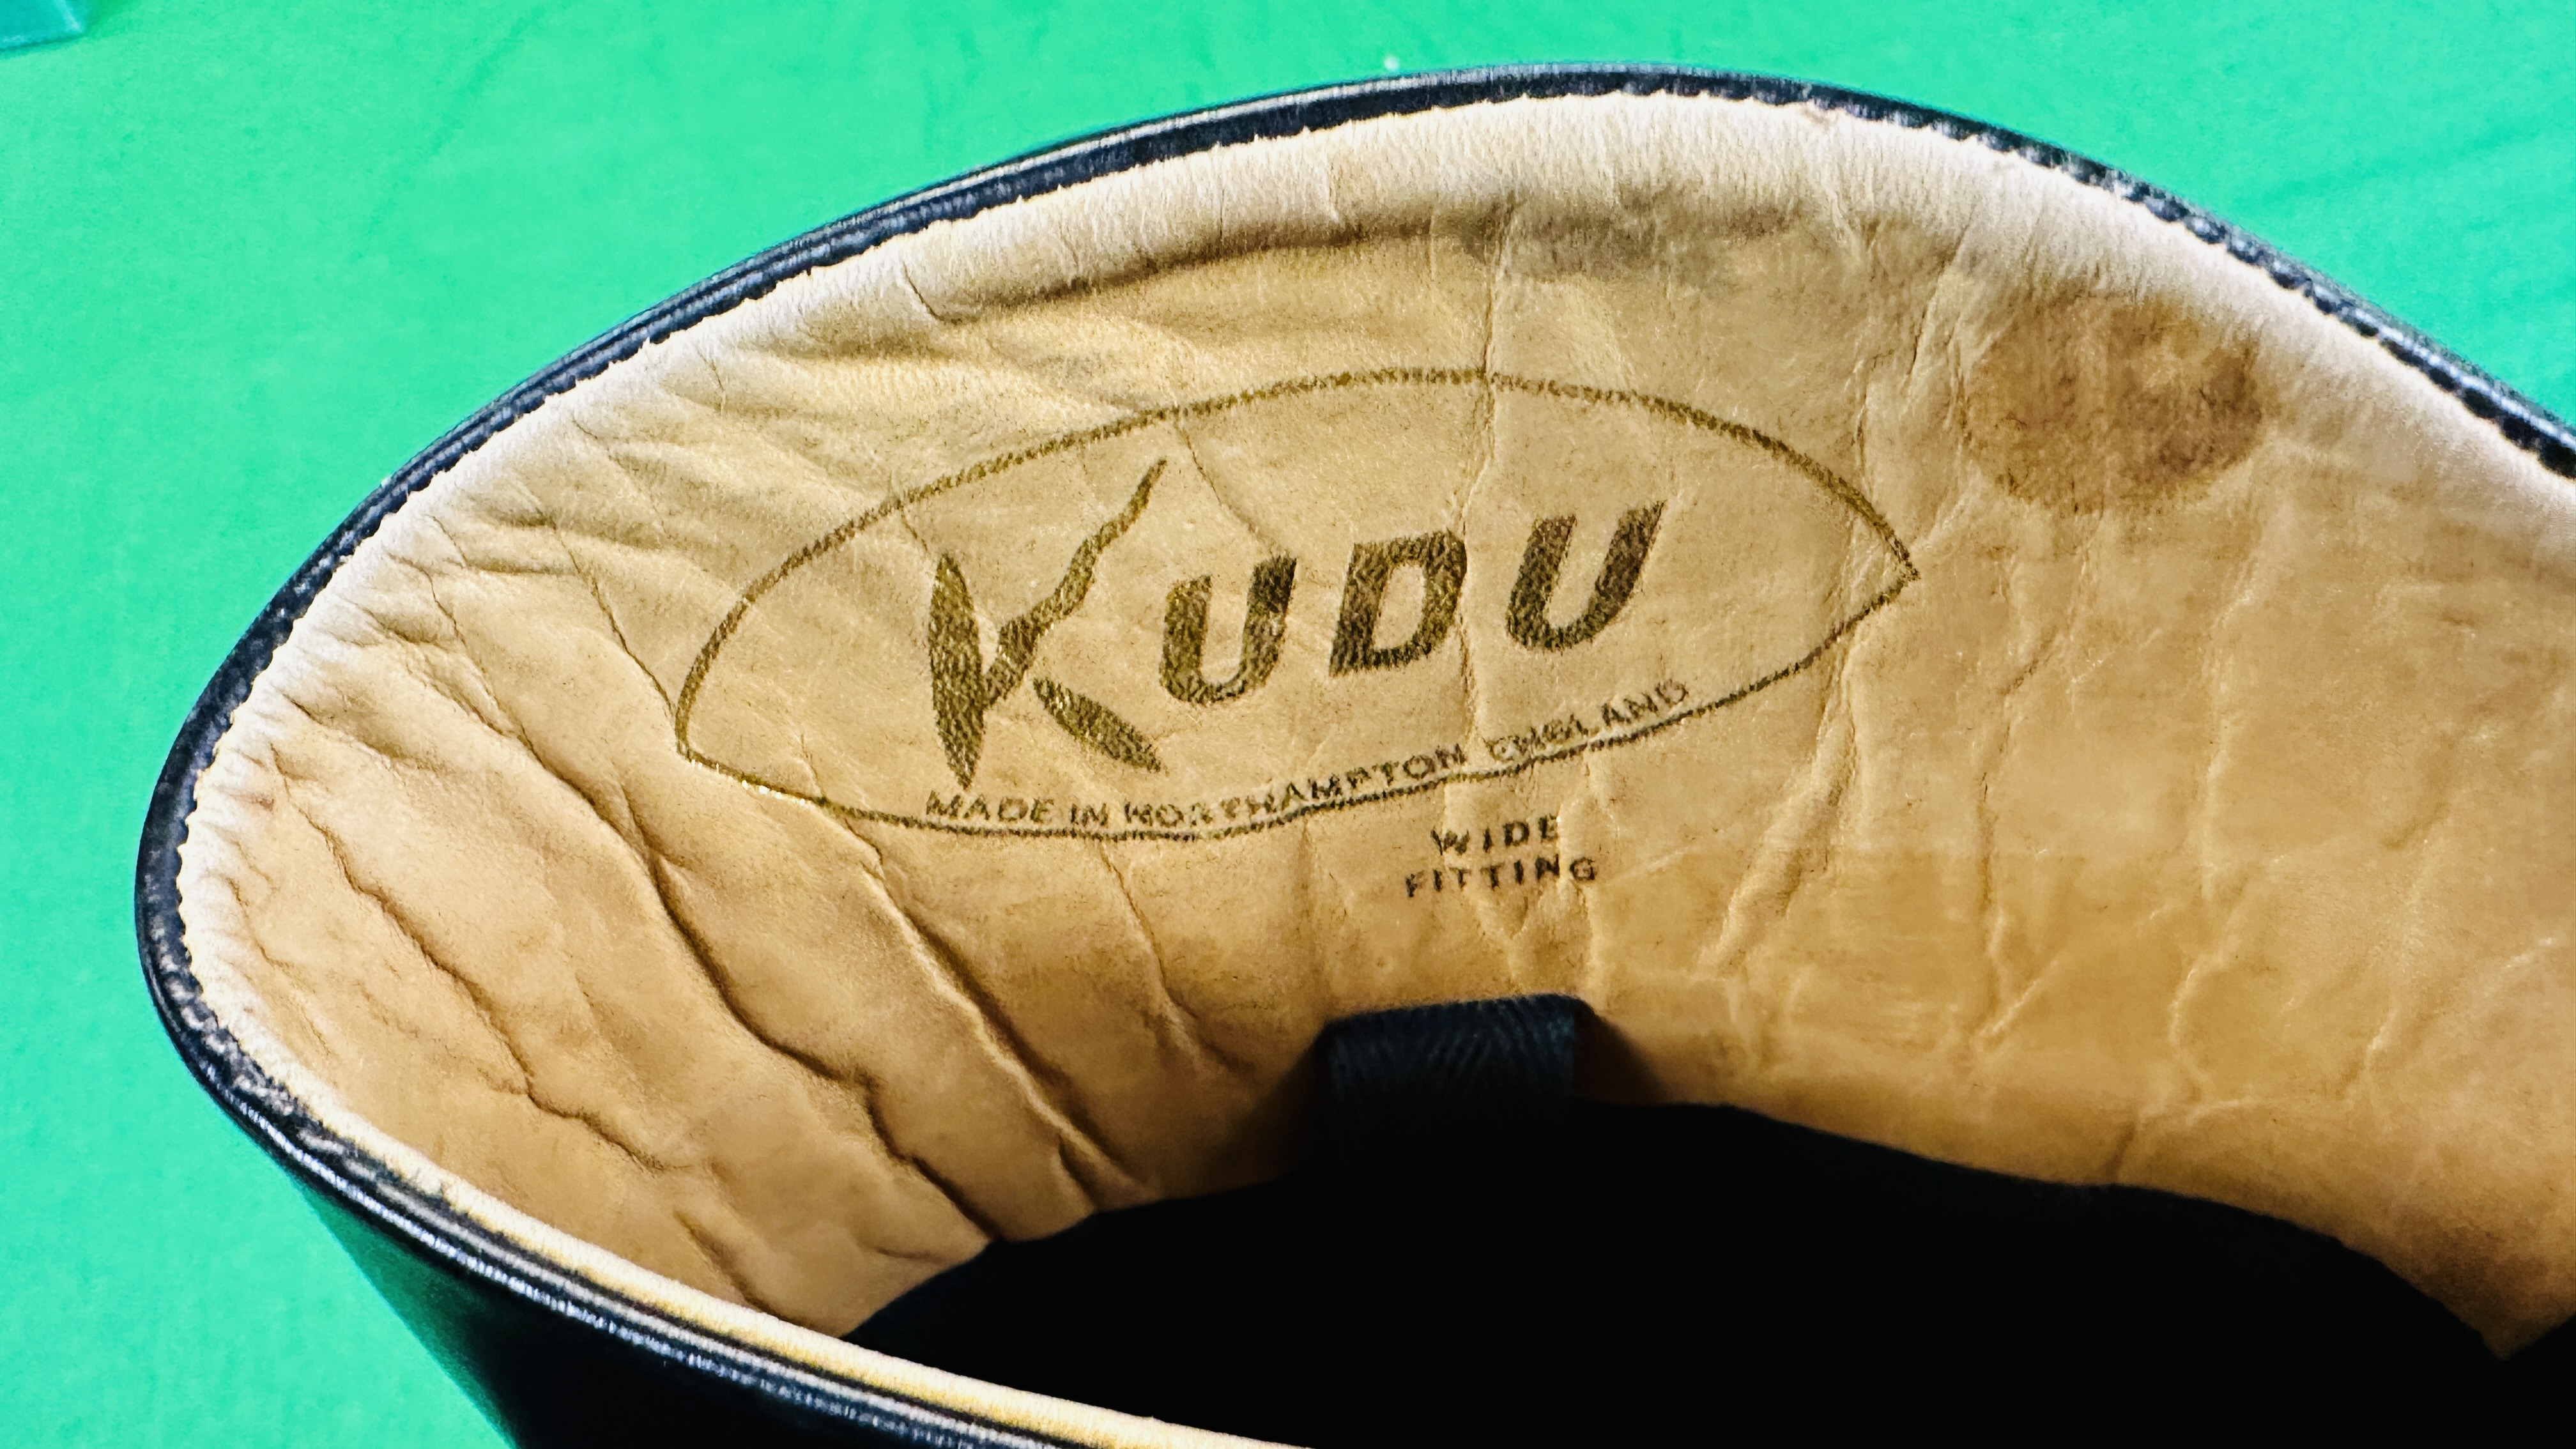 A PAIR OF KUDU BLACK LEATHER RIDING BOOTS, SIZE 6½ WIDE FITTING. - Image 5 of 7